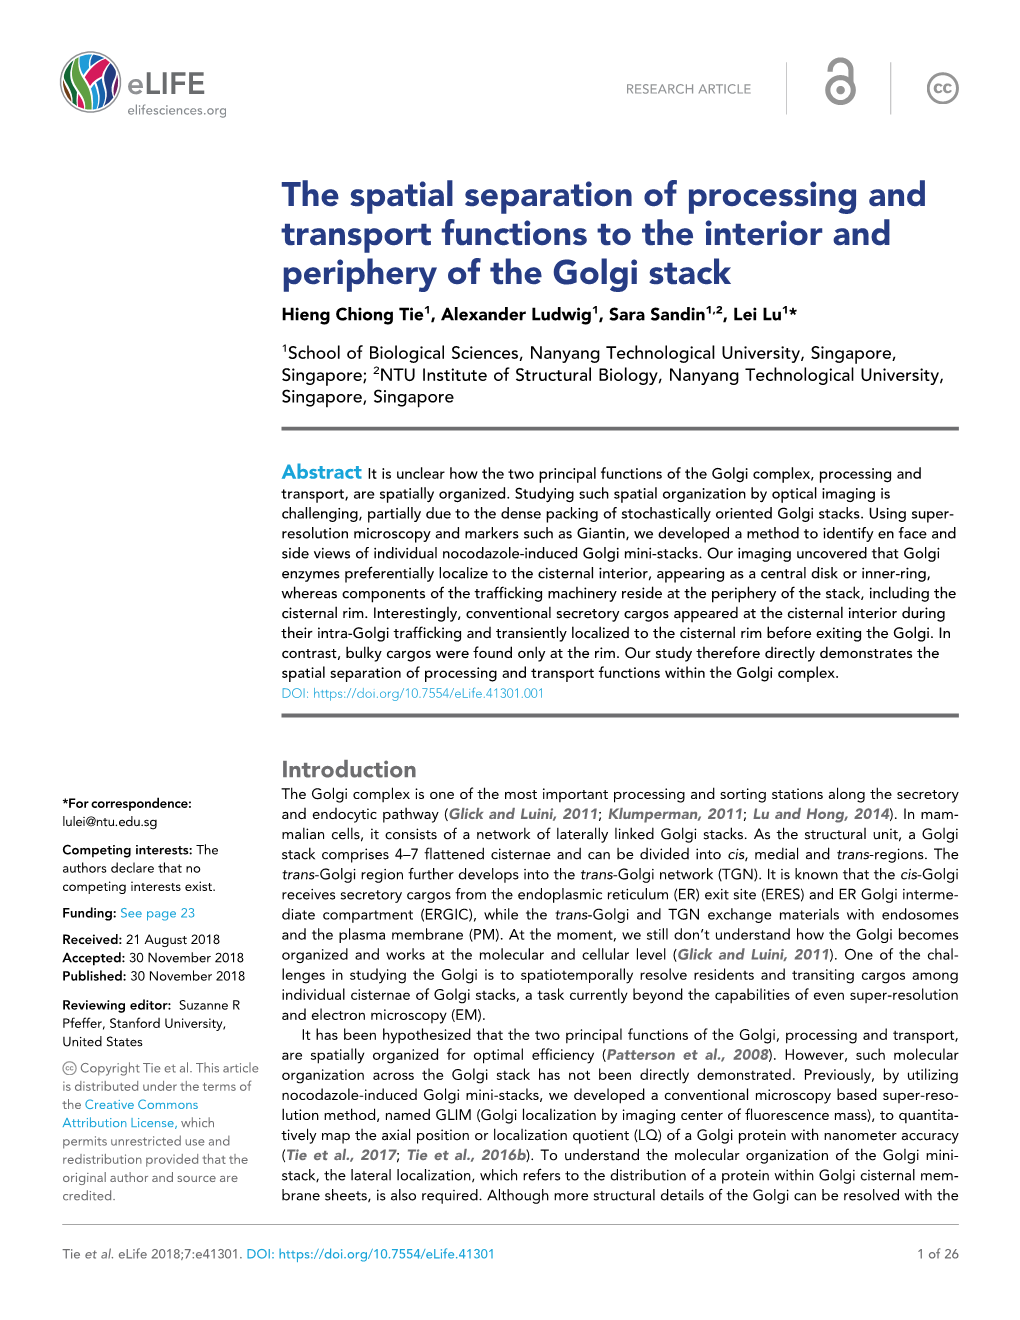 The Spatial Separation of Processing and Transport Functions to The